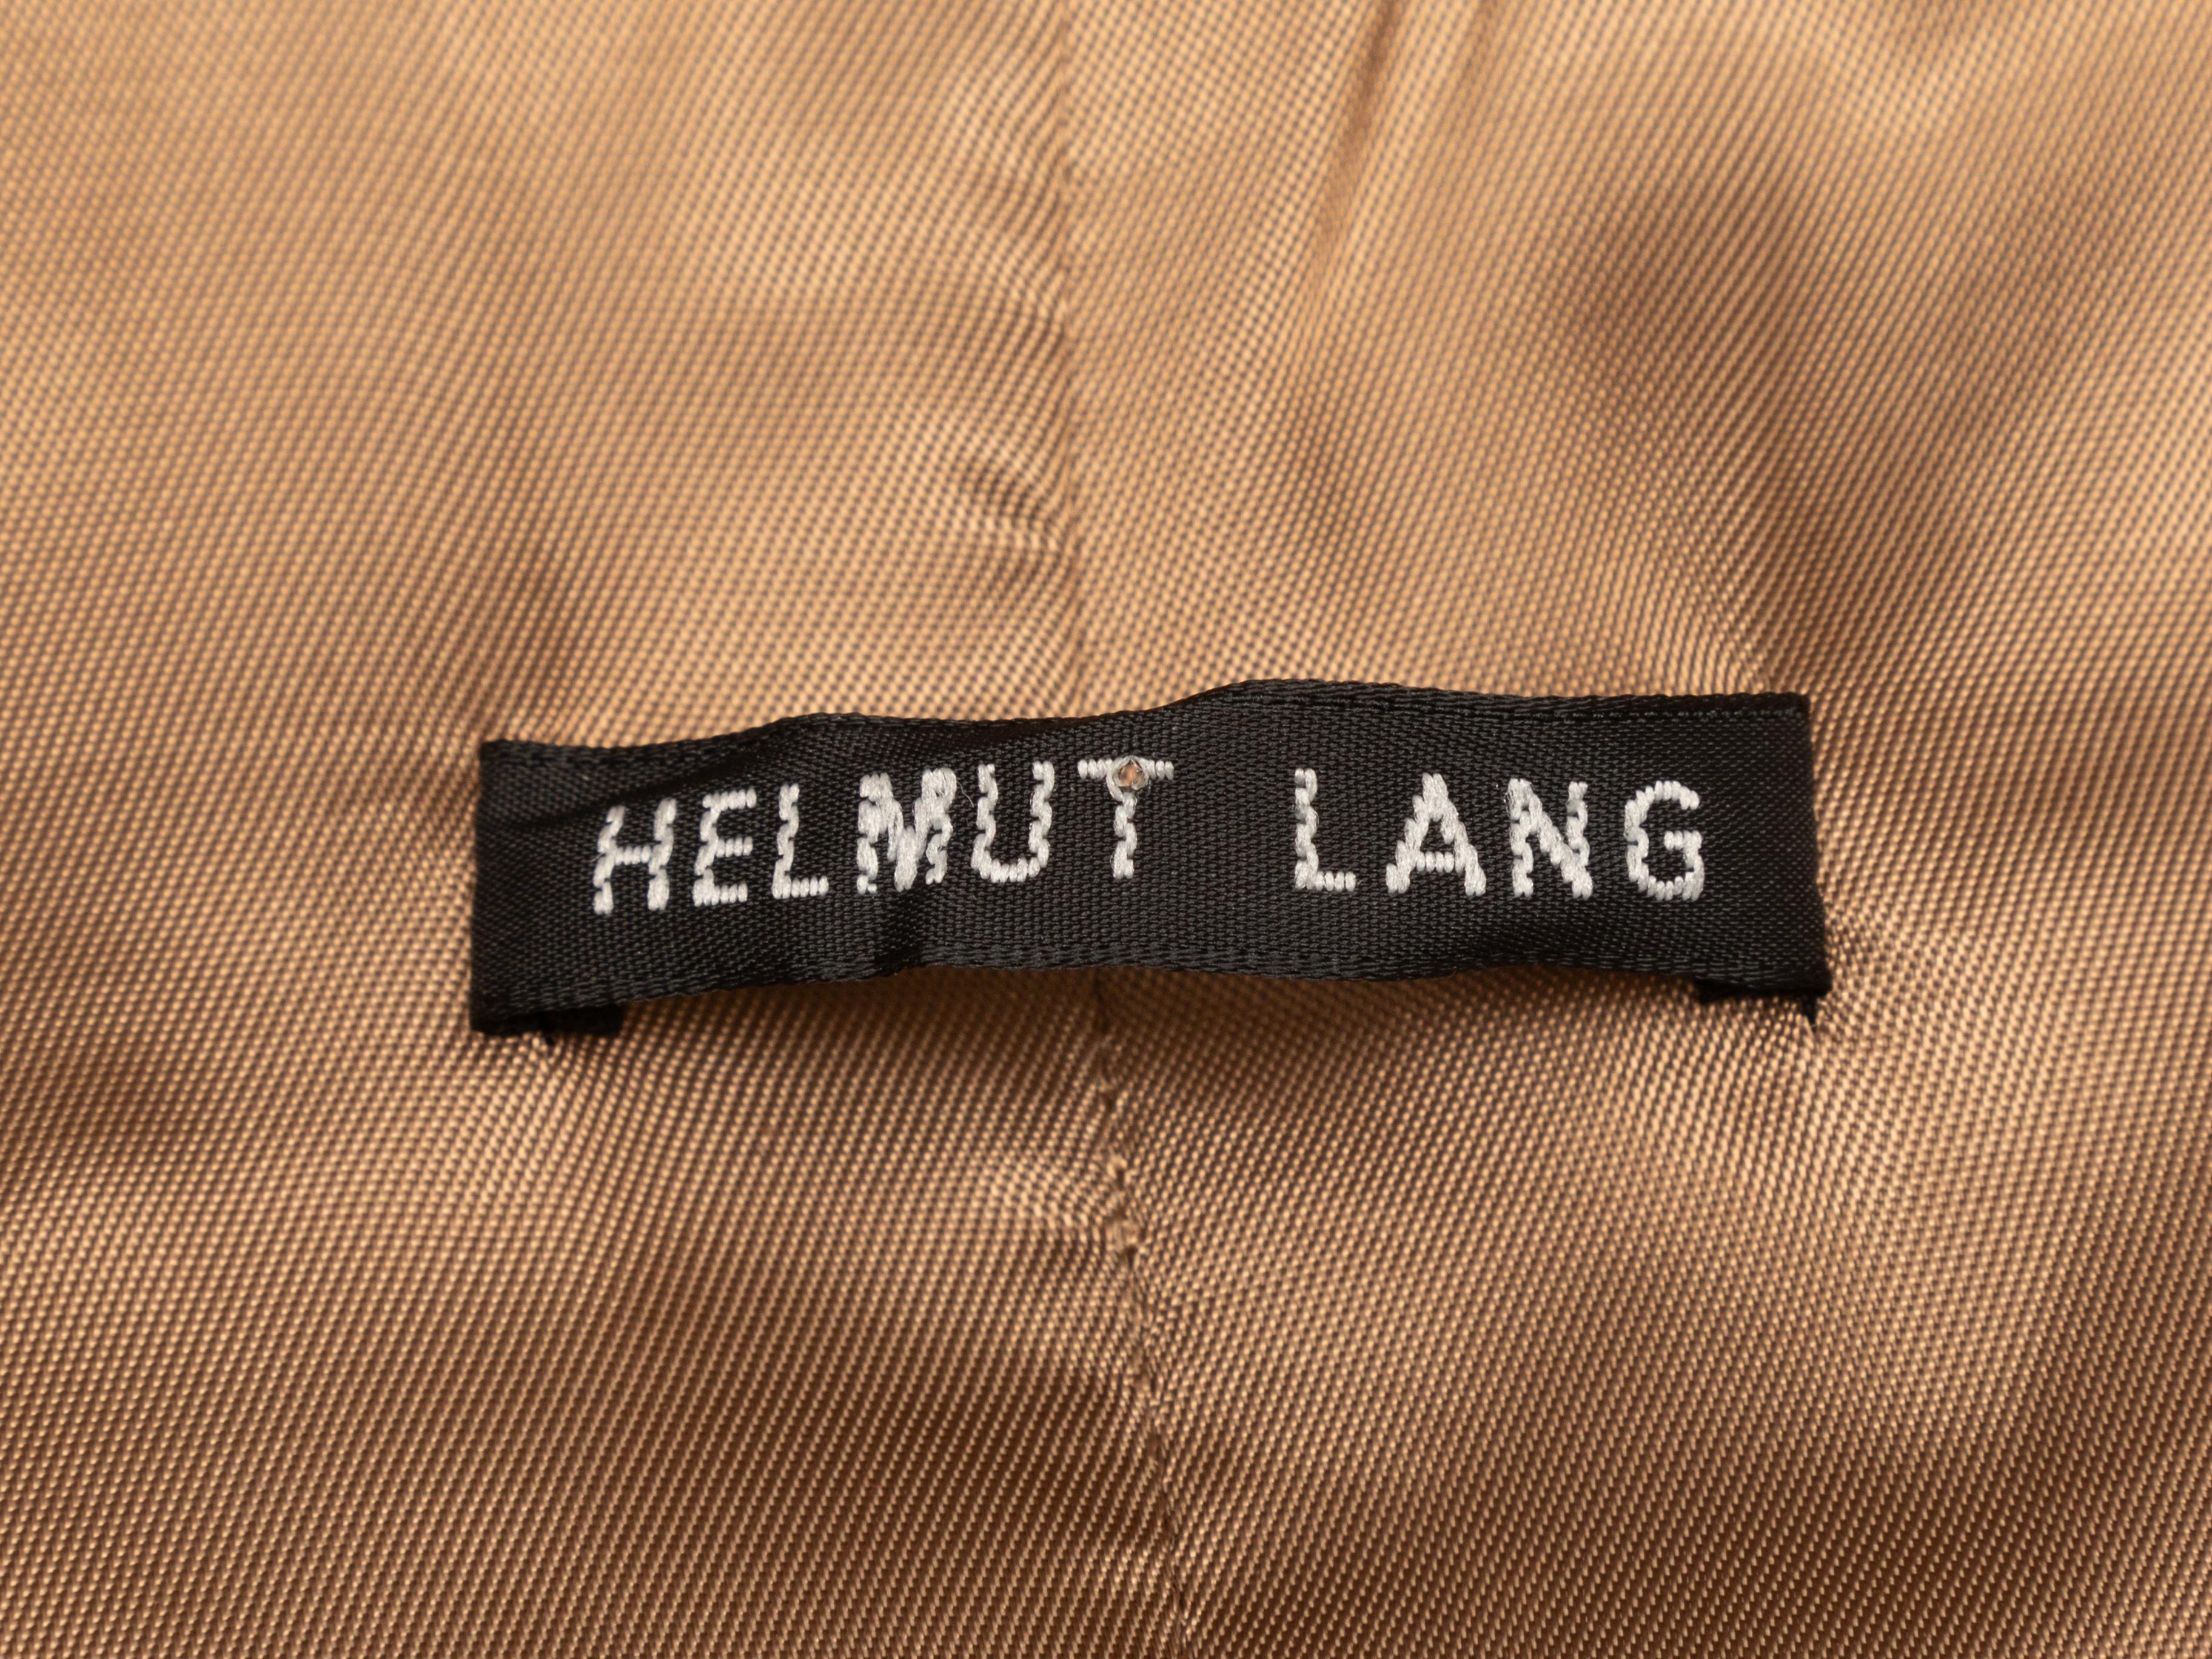 Vintage tan leather coat by Helmut Lang. From the Fall/Winter 2000 Collection. Crew neck. Button closures at center front. Designer size 44. 36